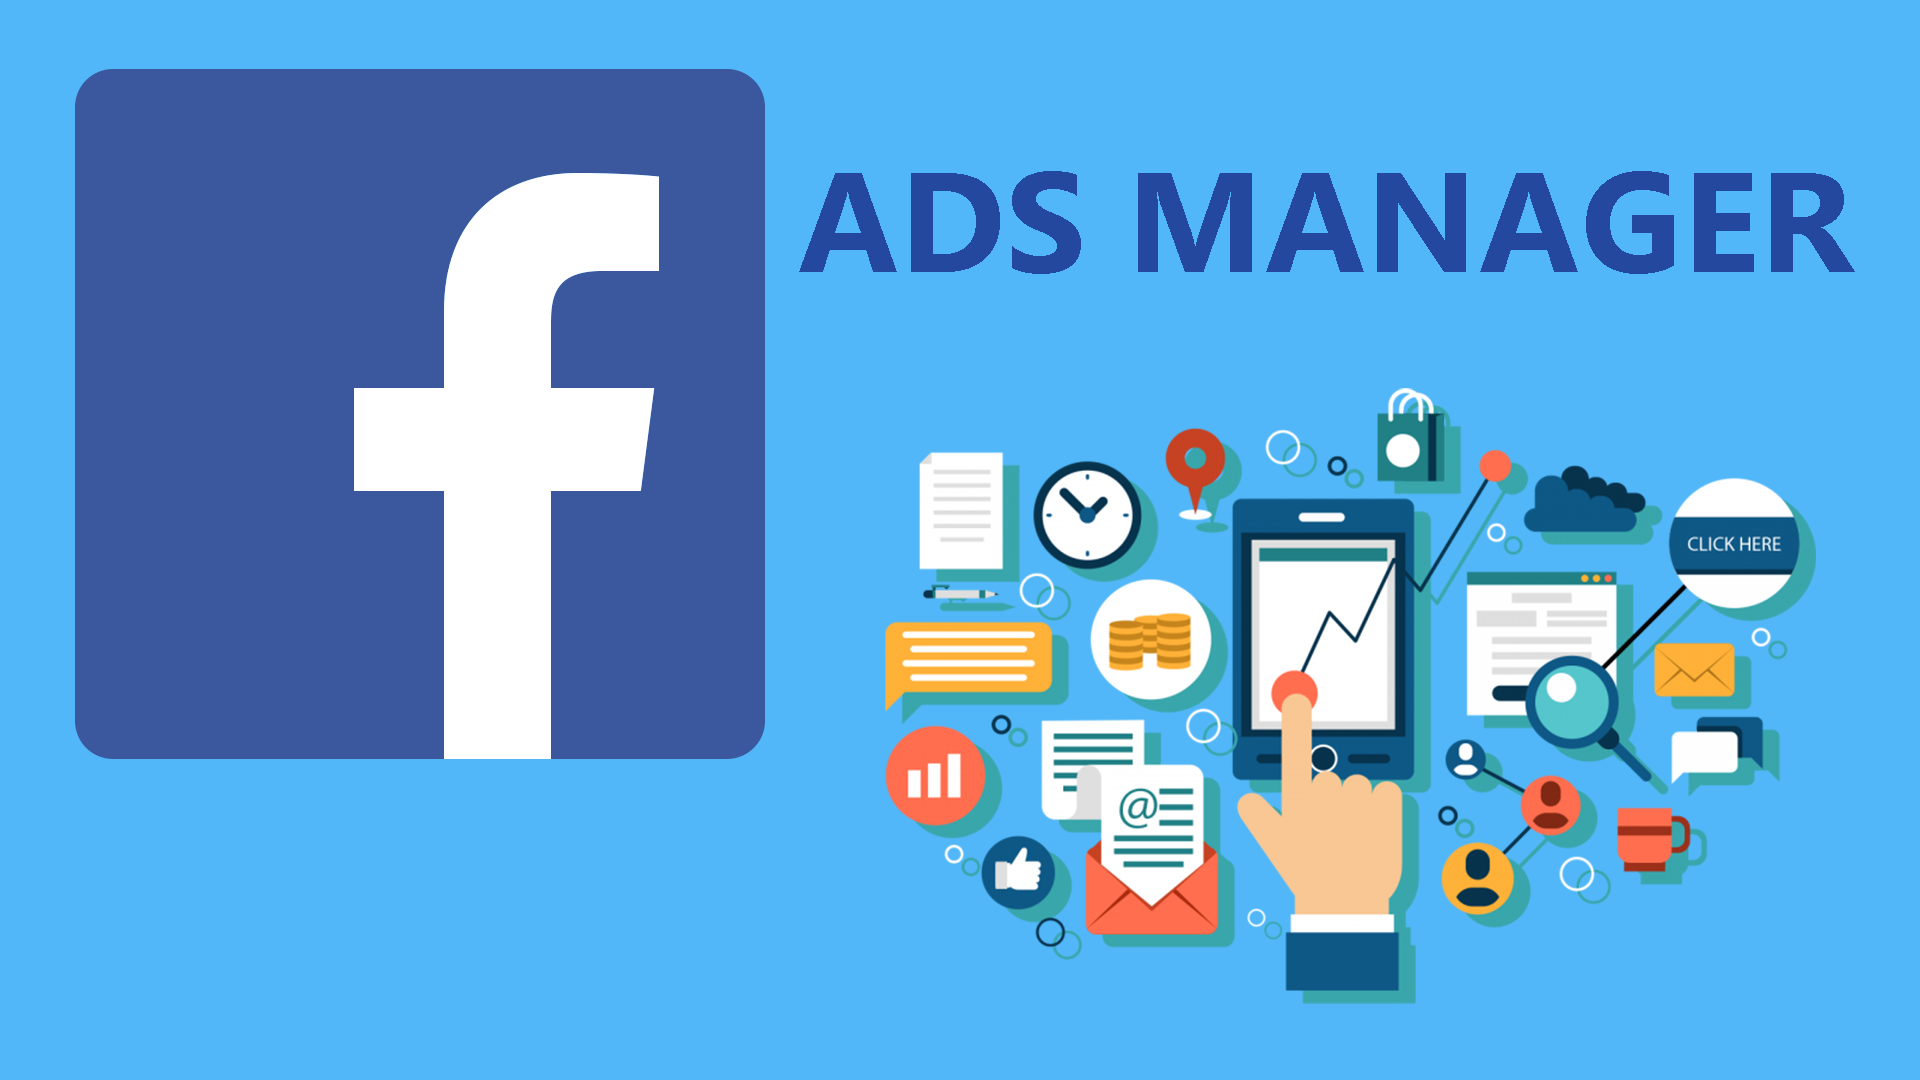 How-to-use-Facebook-Ads-Manager-to-Grow-your-Business-featured-image